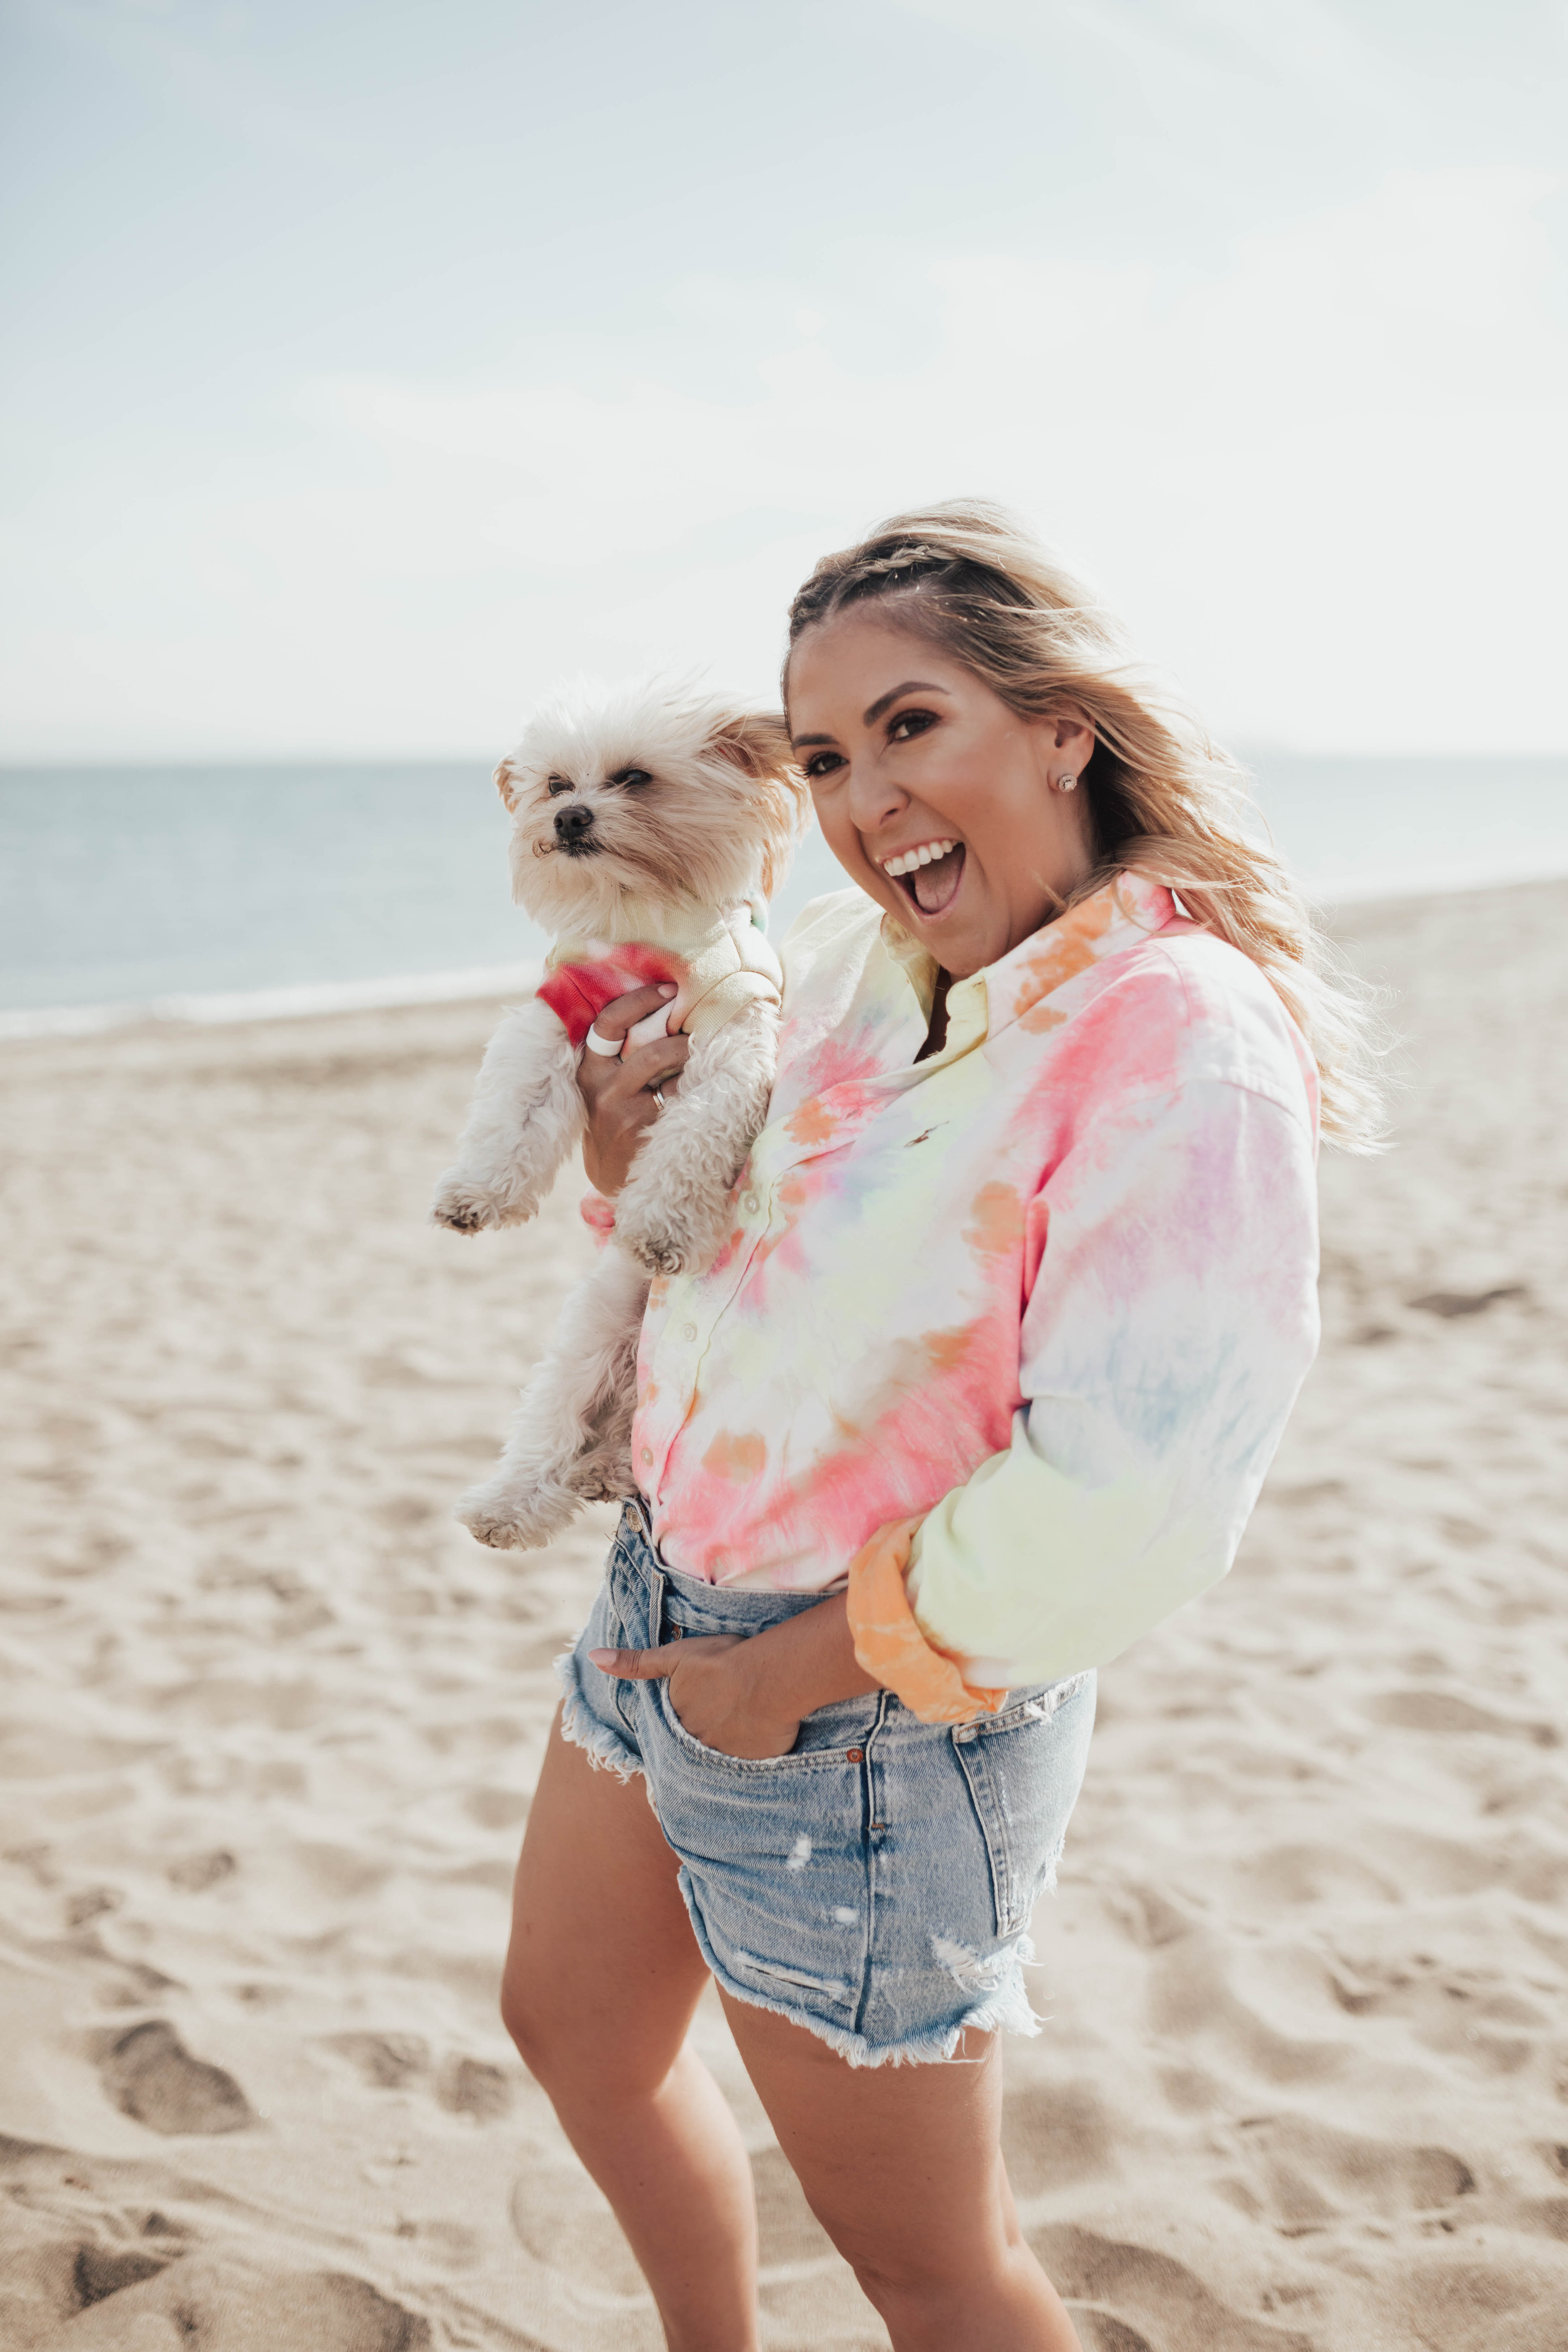 Fashion blogger KatWalkSF on the beach wearing the POLO RALPH LAUREN Big Fit Tie-Dye Shirt with her dog.